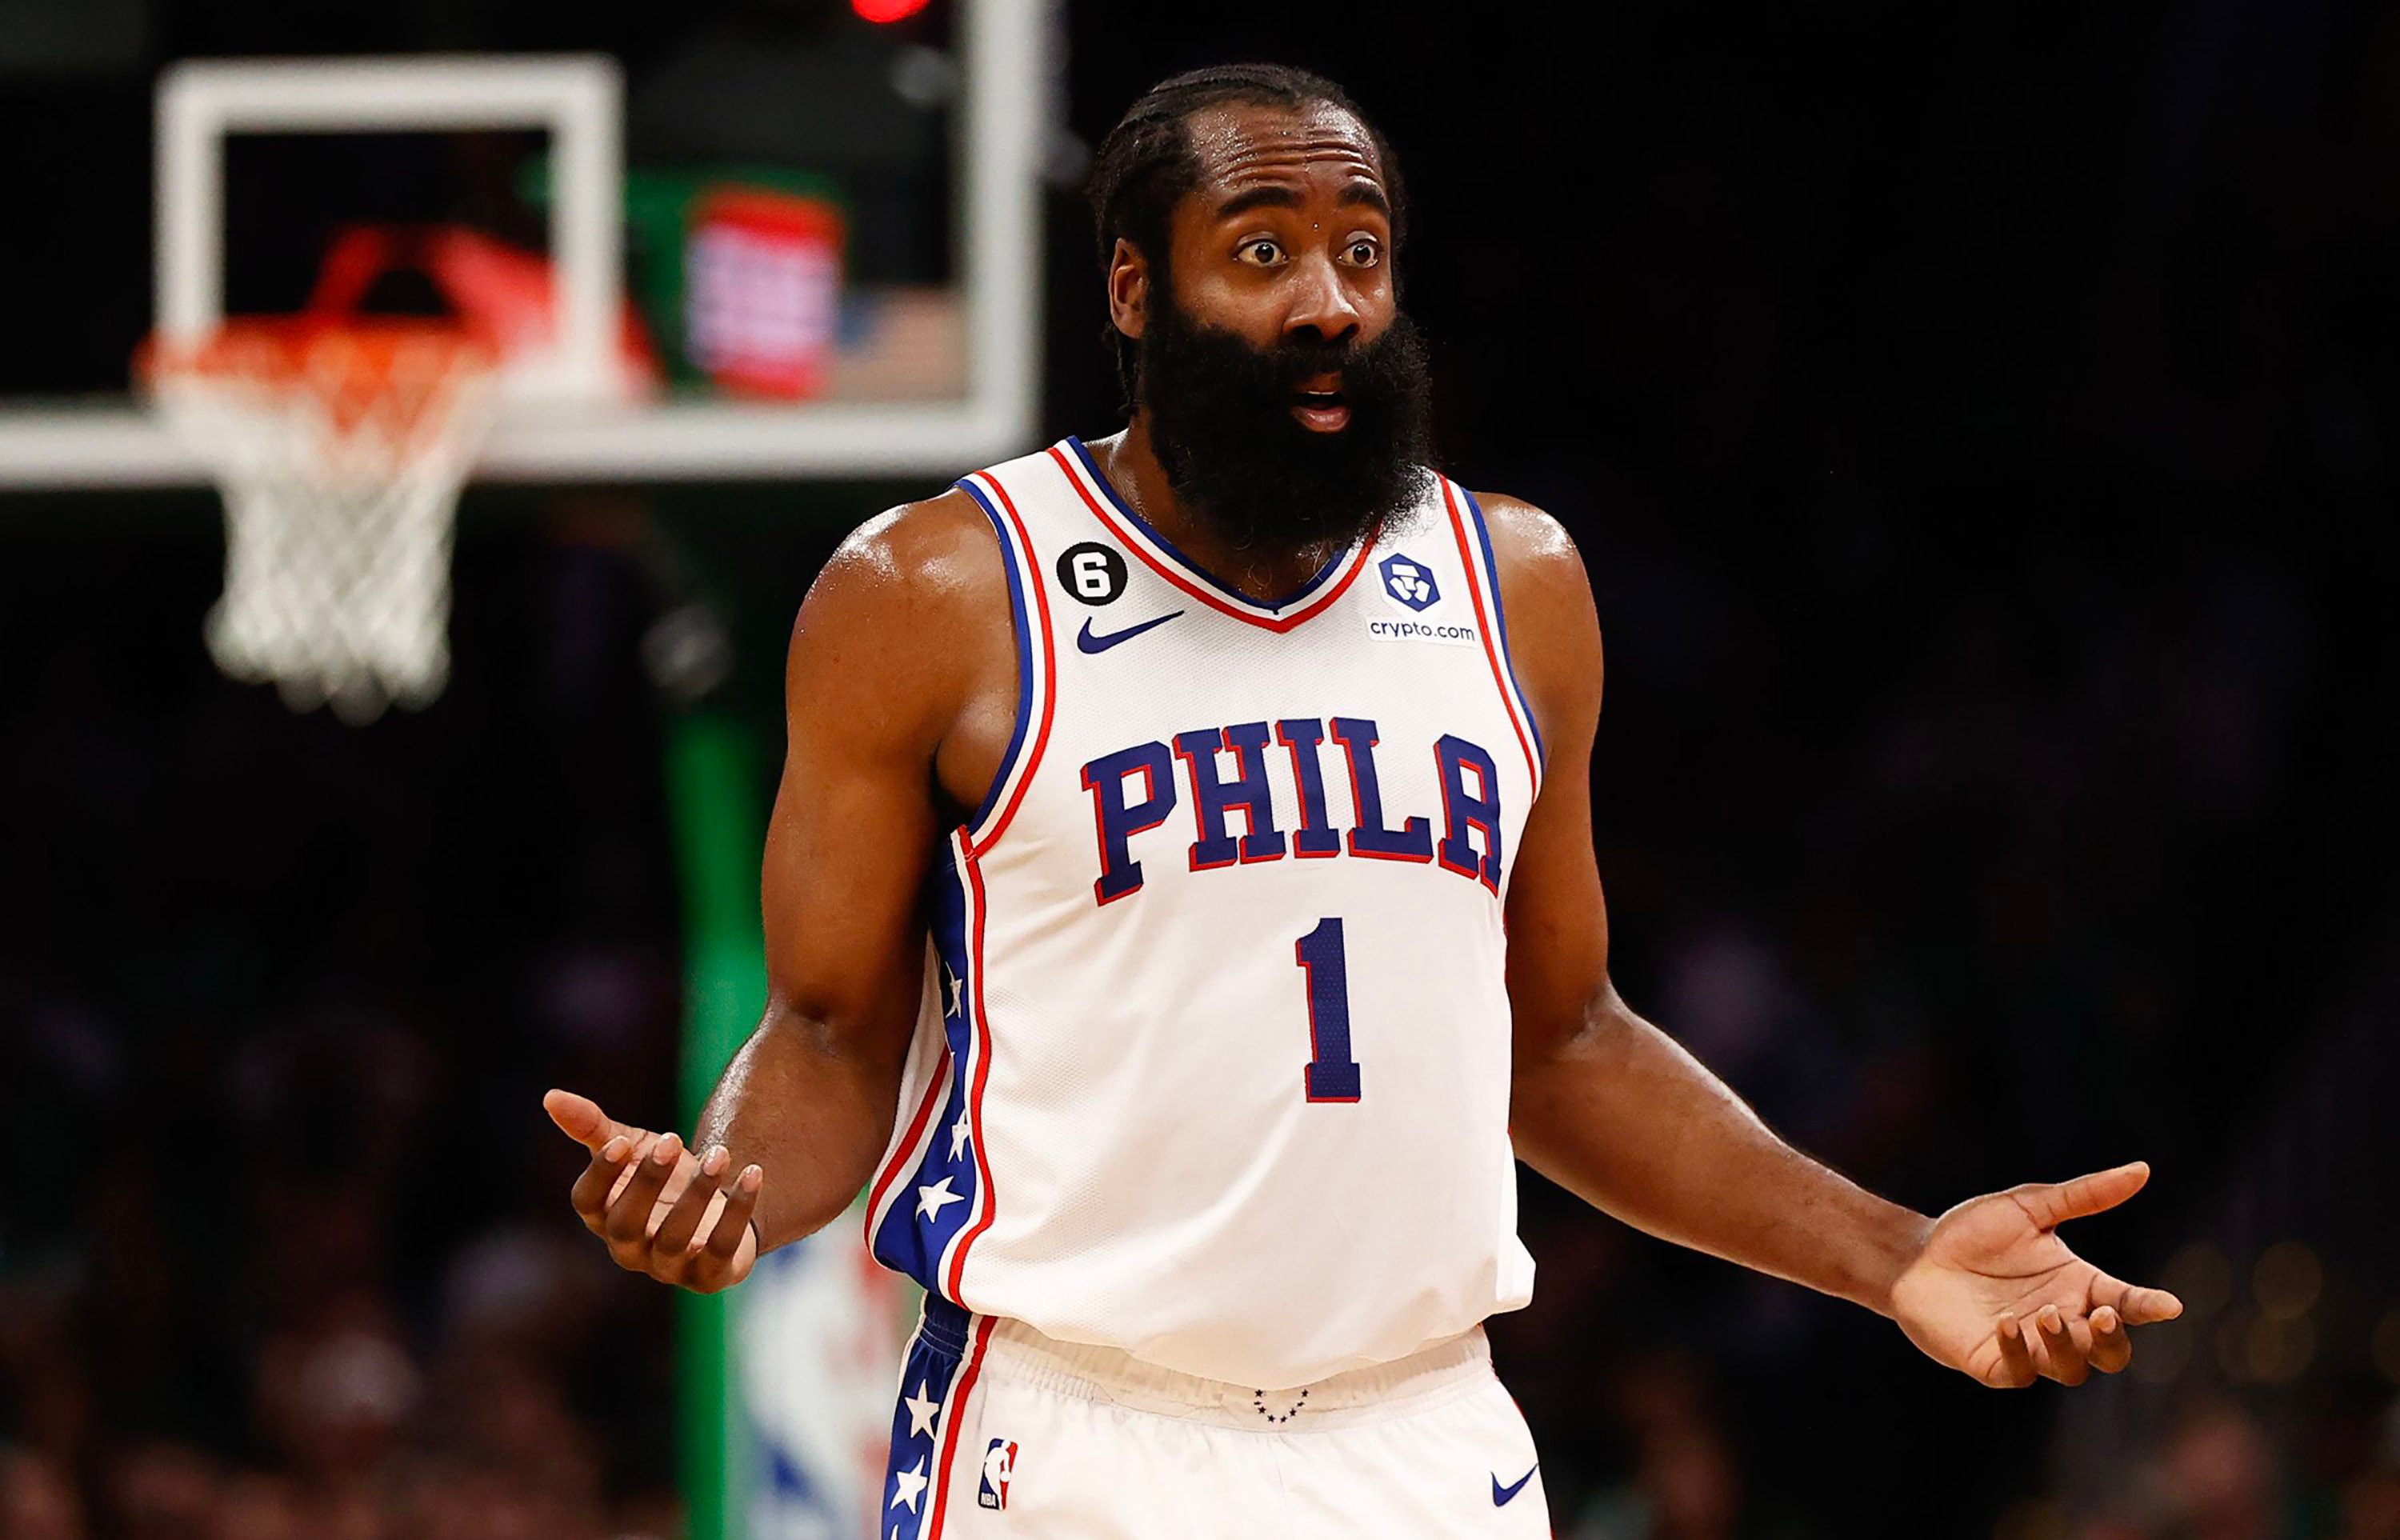 Under the new policy, James Harden would be considered a ‘star’ player with prioritised playing time. Photo: TNS